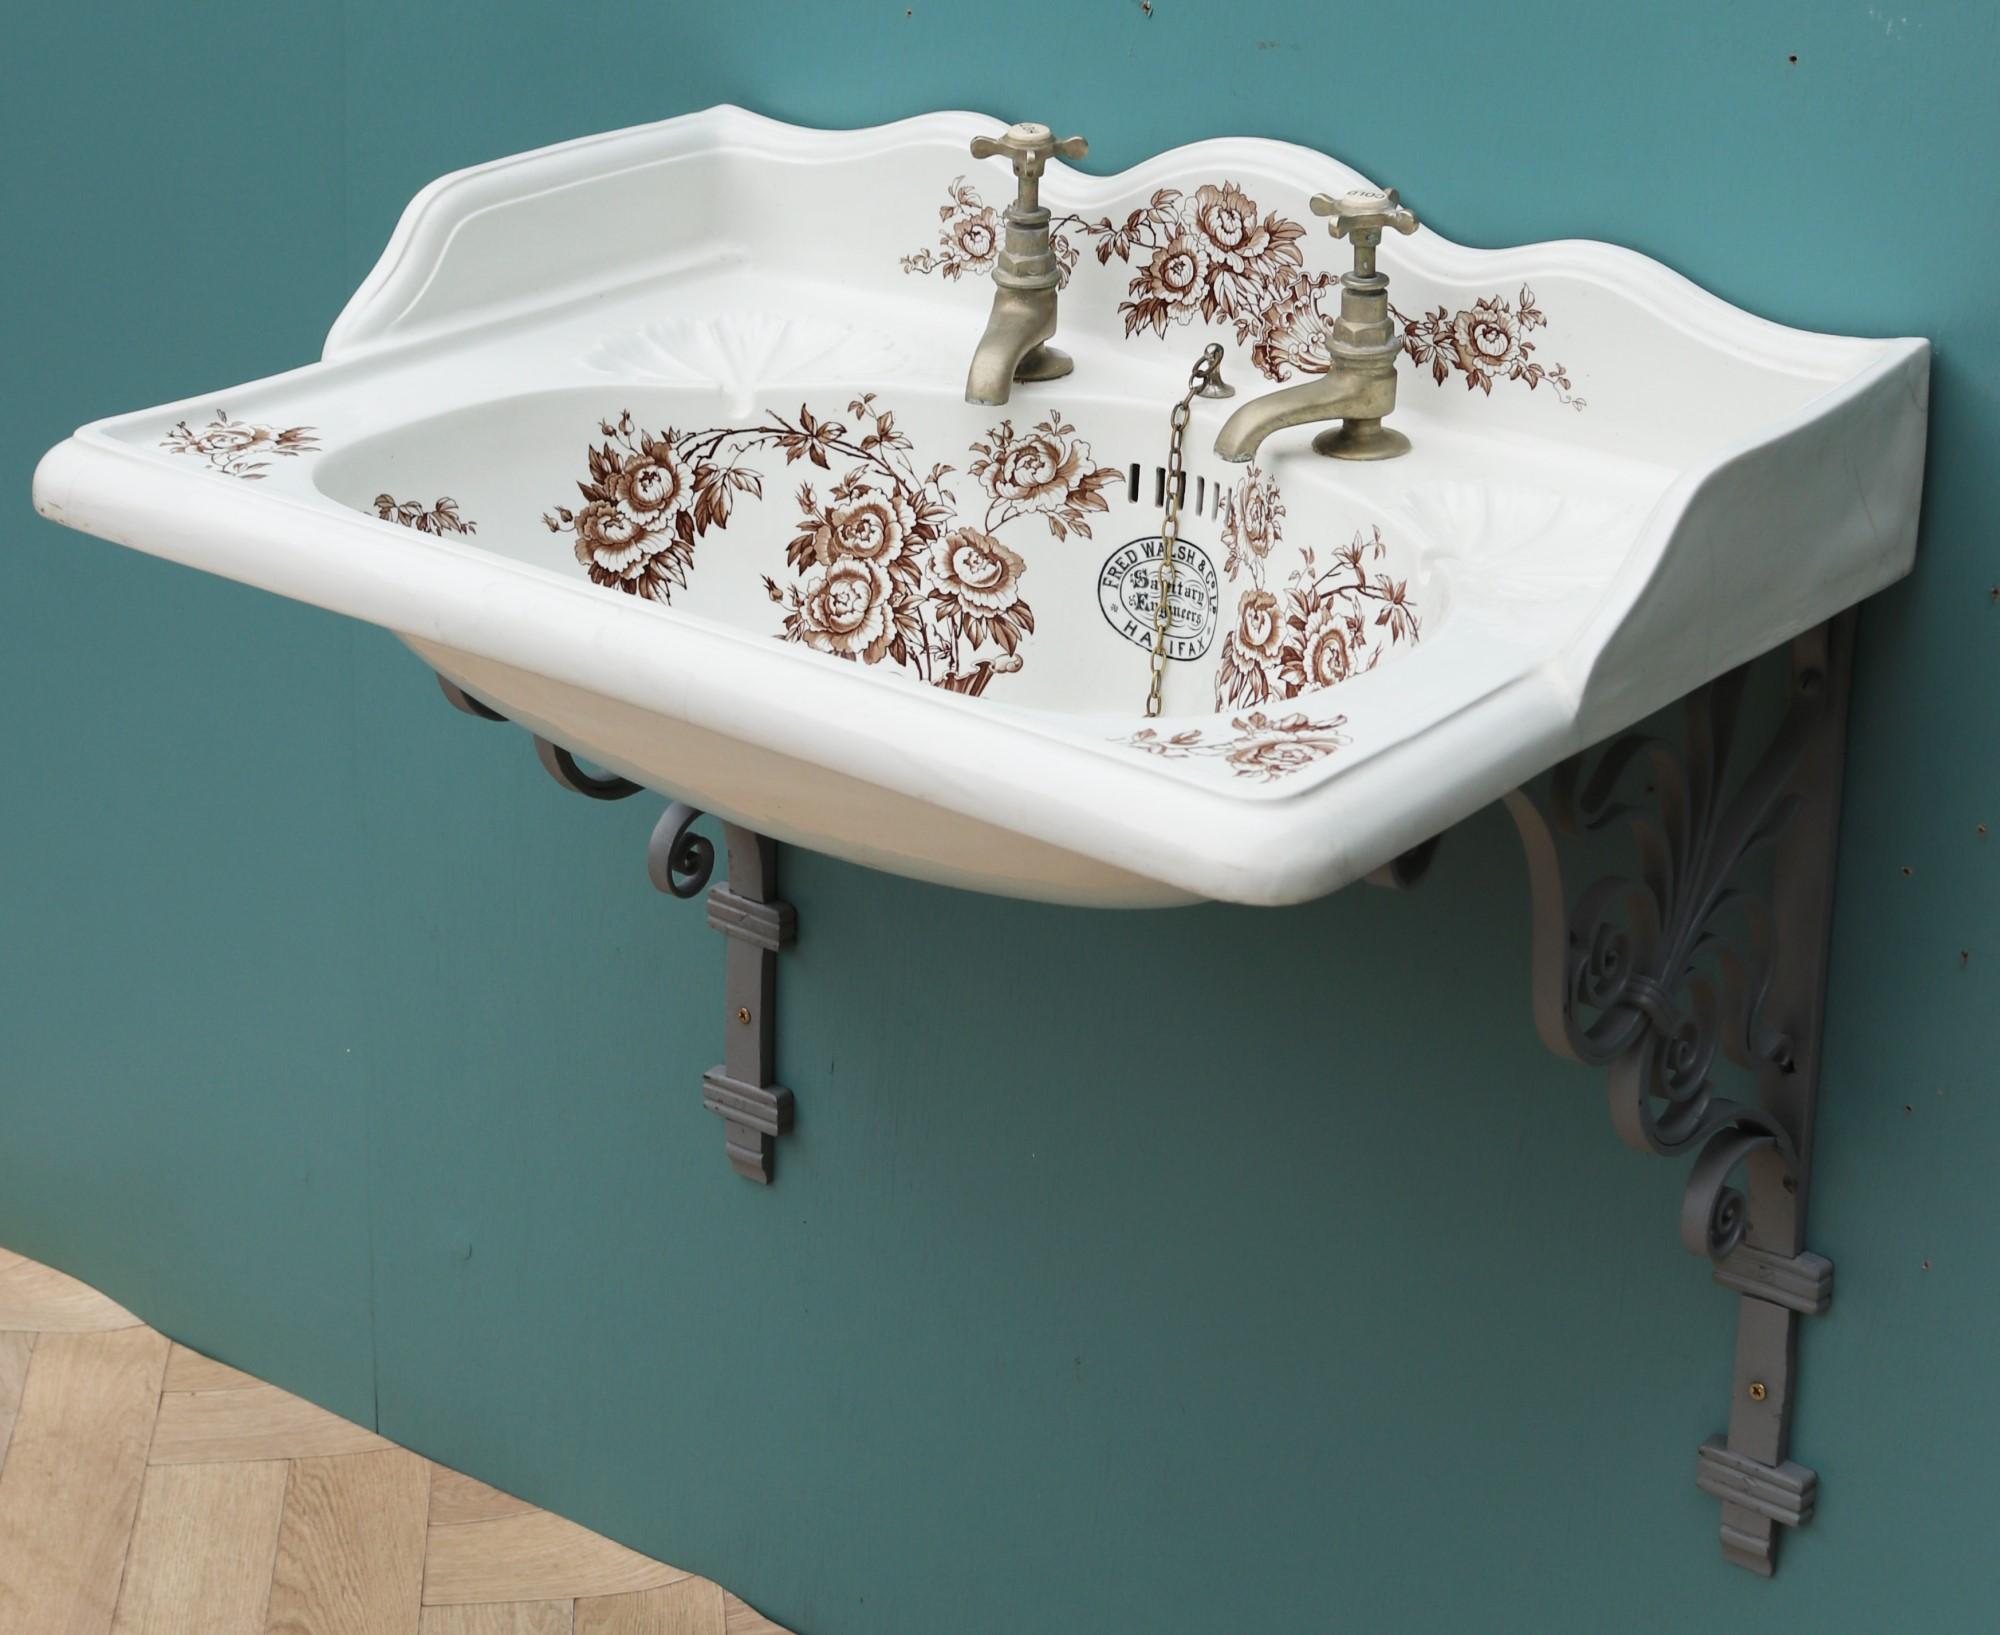 19th Century Antique English Transfer Printed Basin or Sink For Sale